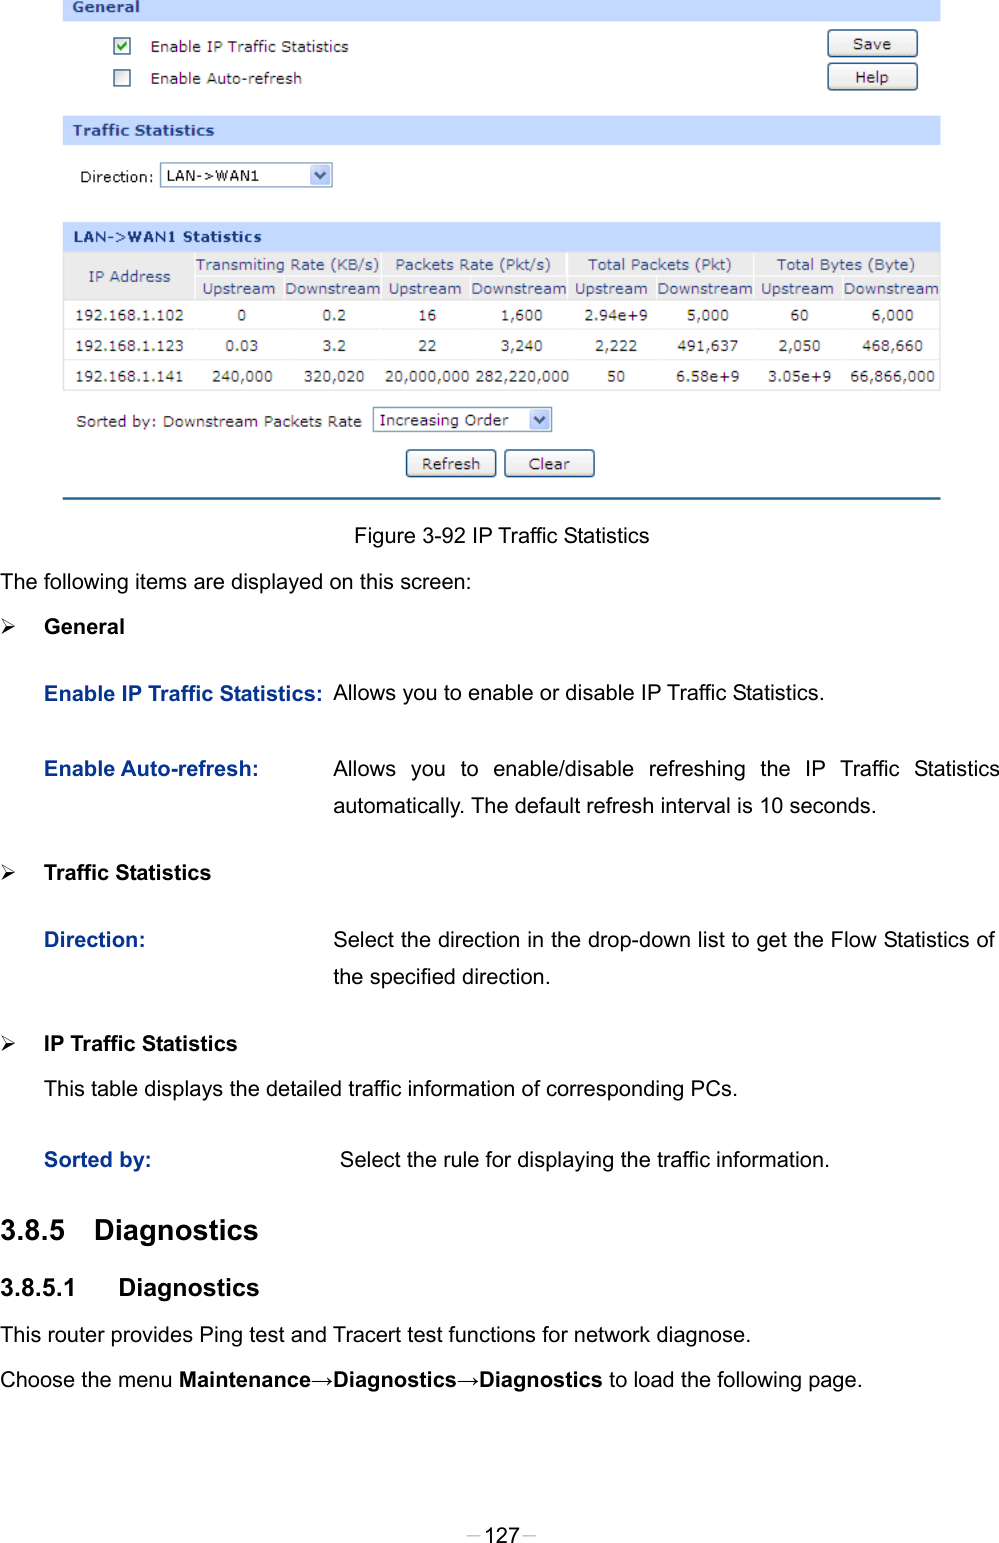   Figure 3-92 IP Traffic Statistics The following items are displayed on this screen:  General Enable IP Traffic Statistics: Allows you to enable or disable IP Traffic Statistics. Enable Auto-refresh: Allows you to enable/disable refreshing the IP Traffic Statistics automatically. The default refresh interval is 10 seconds.  Traffic Statistics Direction: Select the direction in the drop-down list to get the Flow Statistics of the specified direction.  IP Traffic Statistics   This table displays the detailed traffic information of corresponding PCs. Sorted by: Select the rule for displaying the traffic information. 3.8.5 Diagnostics   3.8.5.1 Diagnostics This router provides Ping test and Tracert test functions for network diagnose. Choose the menu Maintenance→Diagnostics→Diagnostics to load the following page. -127- 